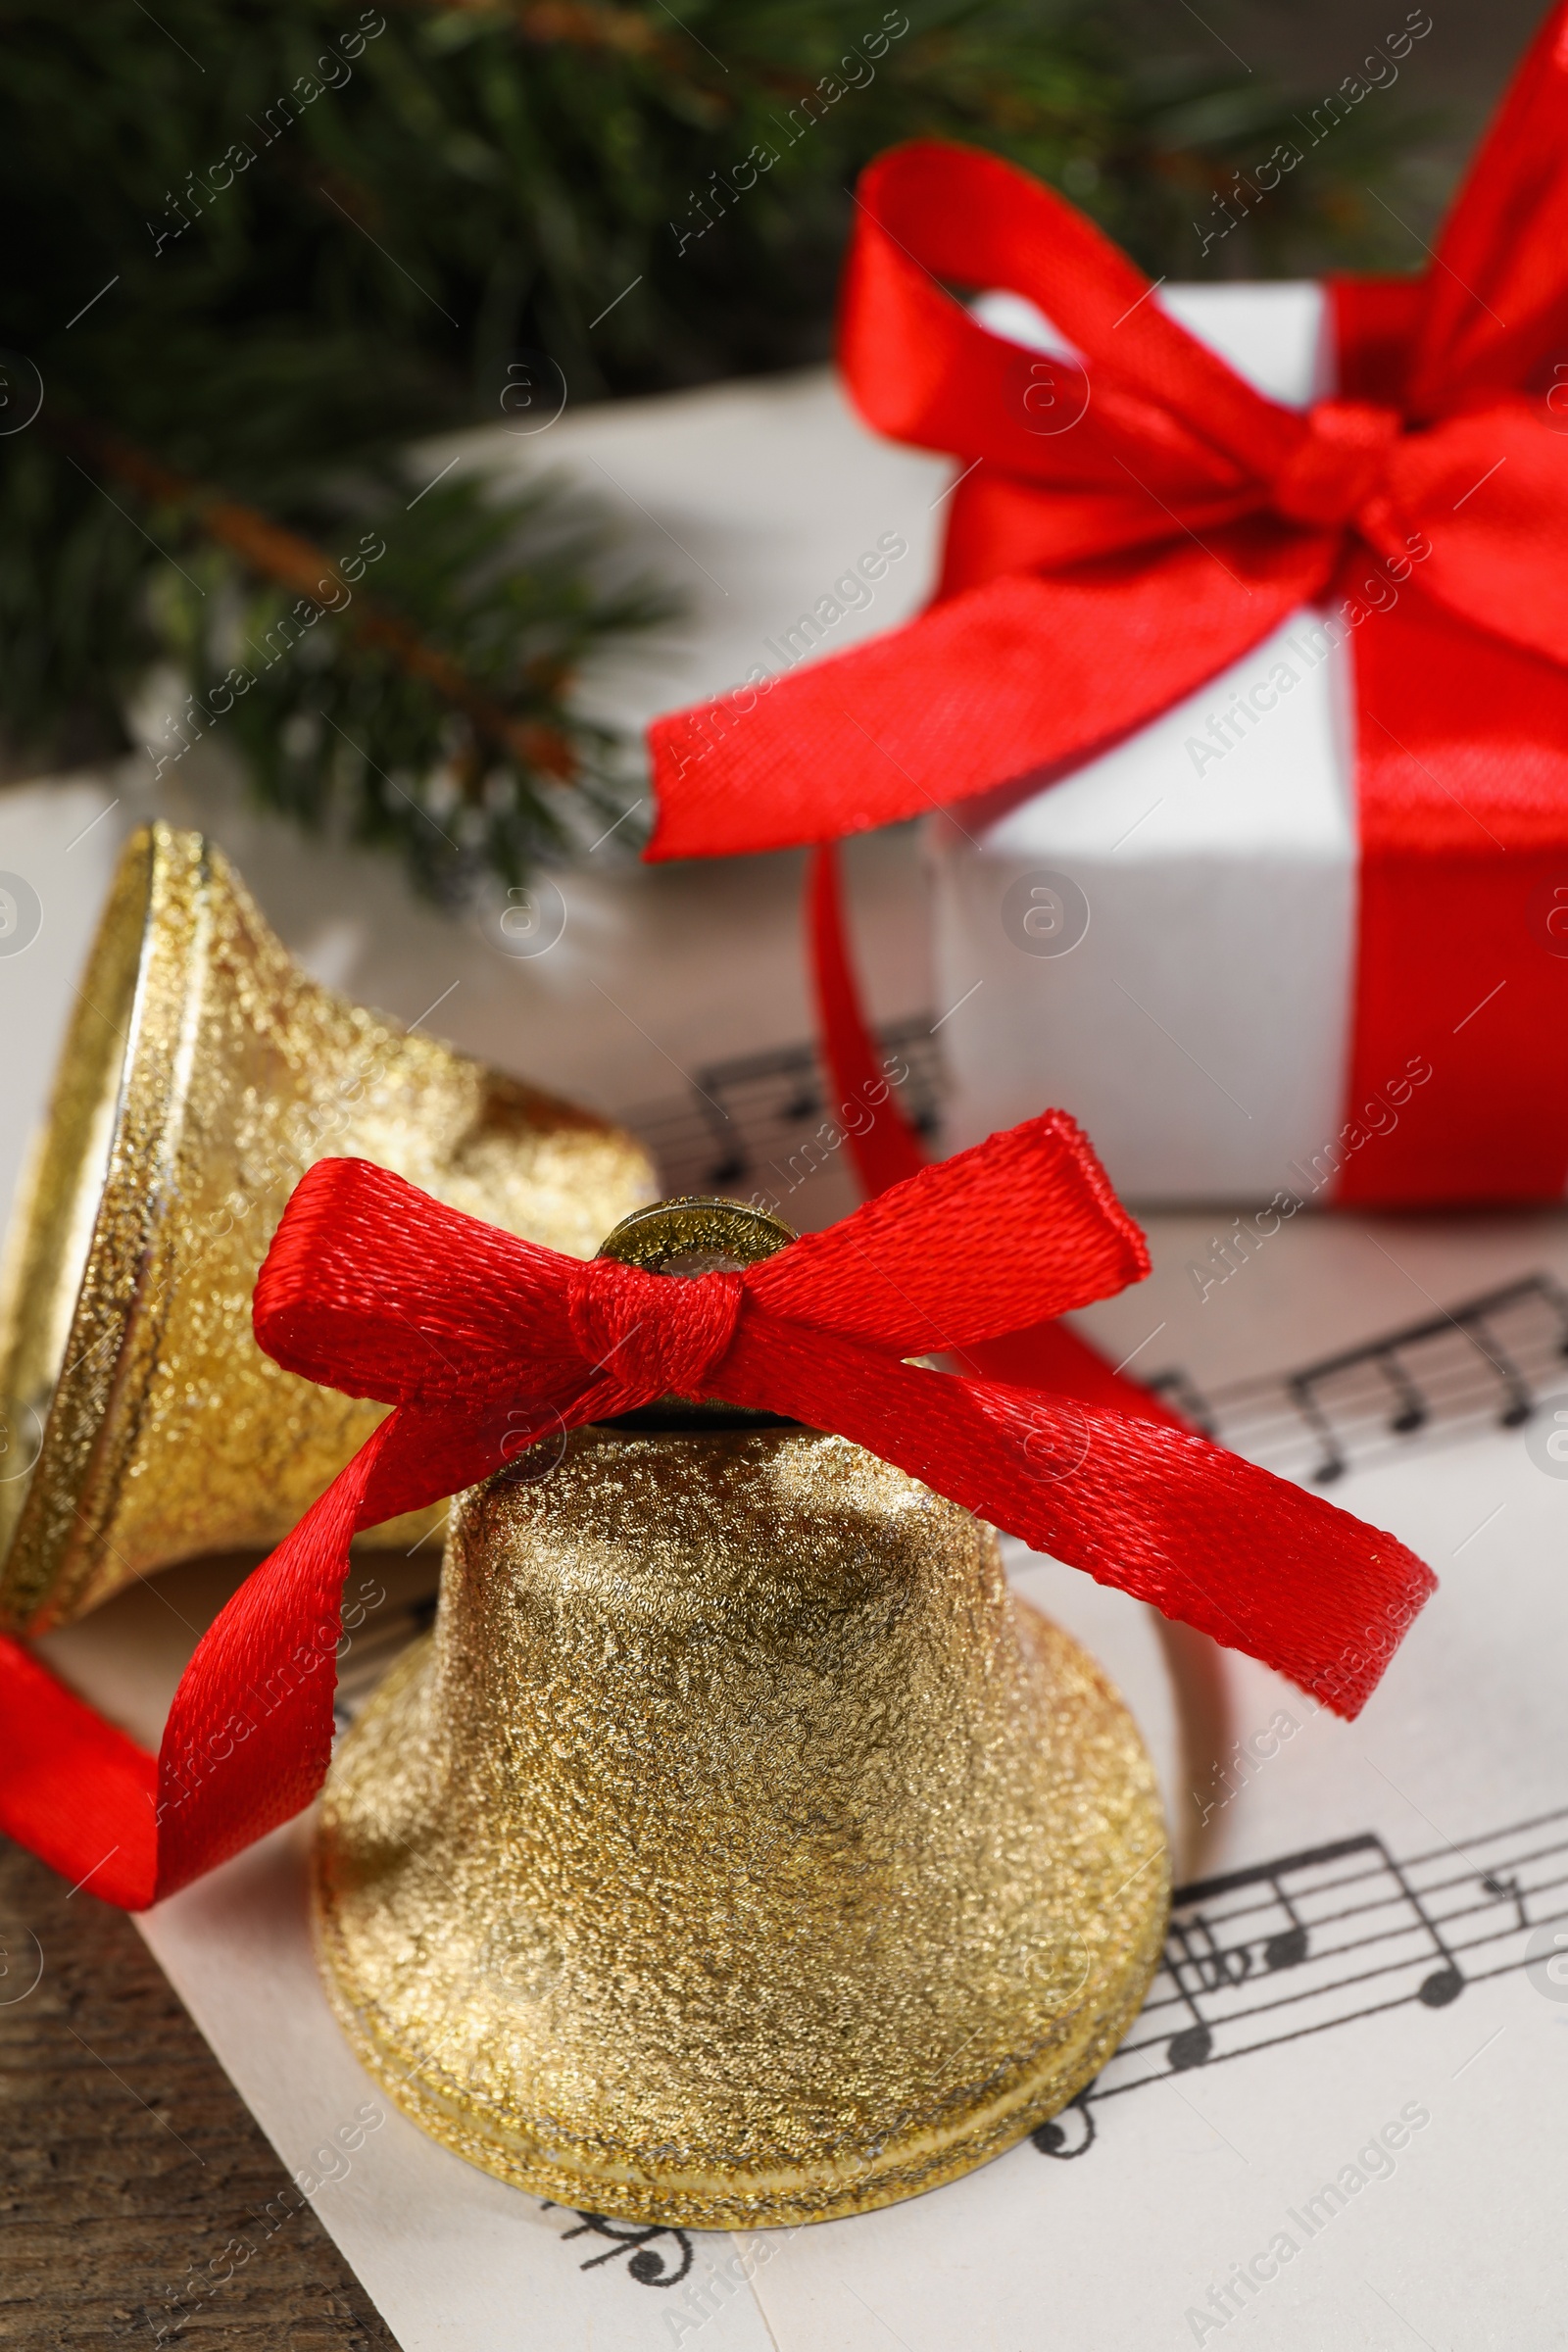 Photo of Bells, gift box and music sheets on wooden table, closeup. Christmas decor